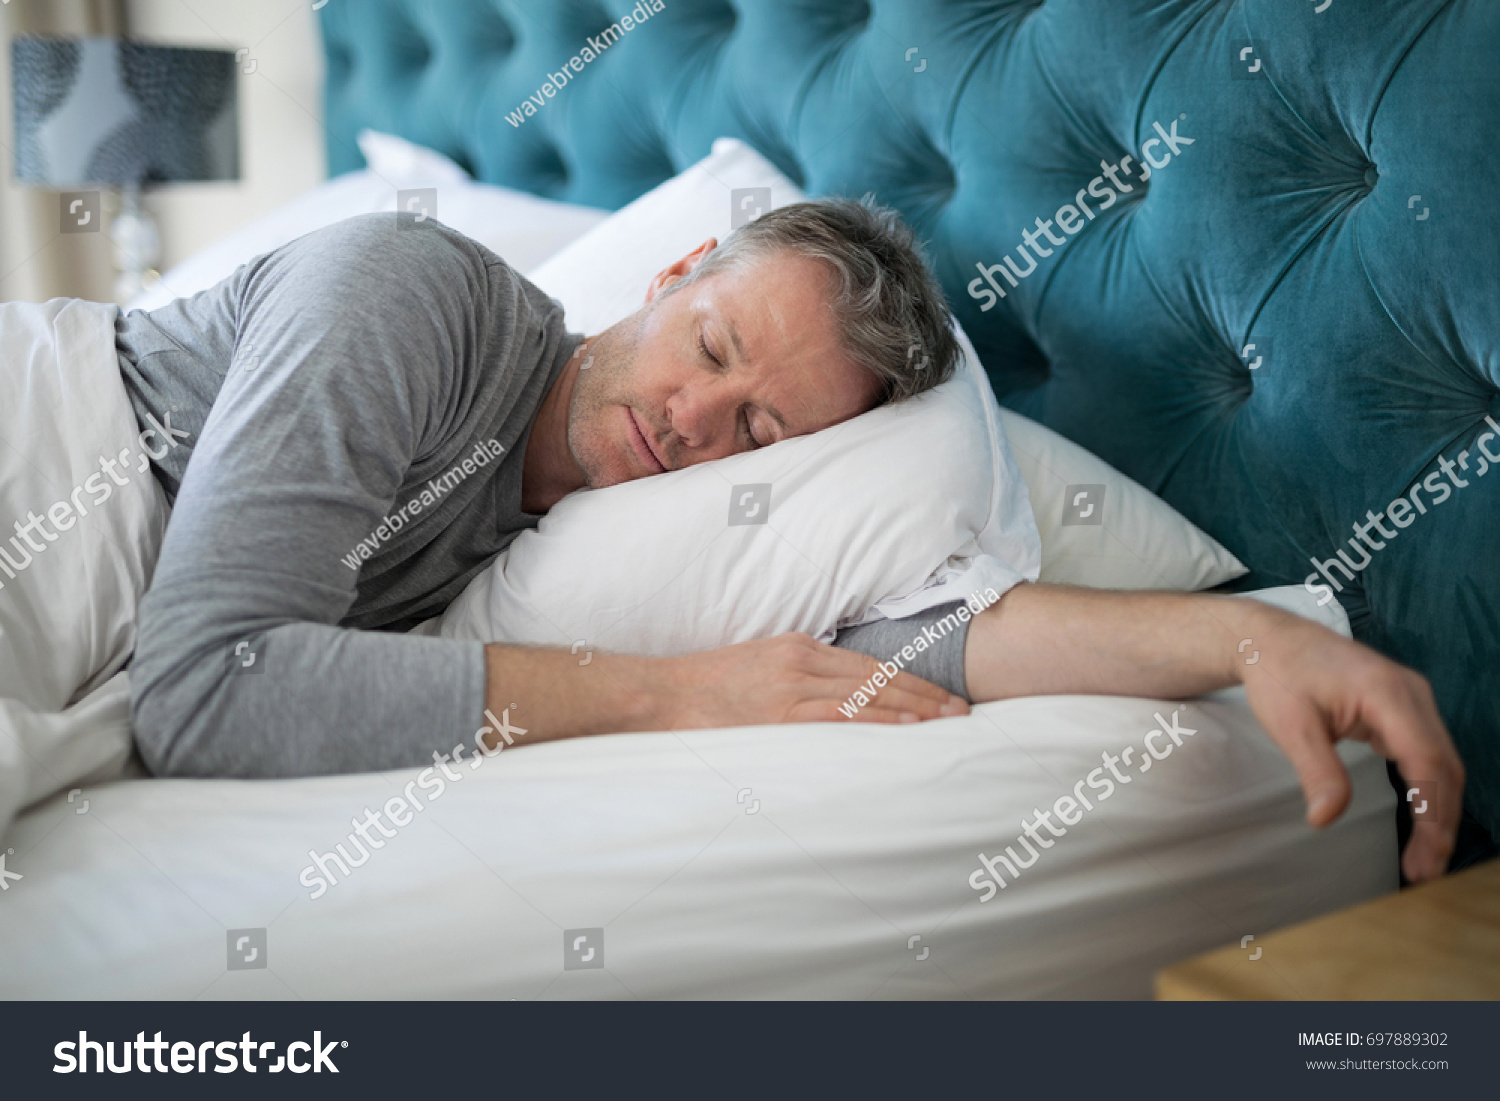 Man sleeping on bed in bedroom at home #697889302